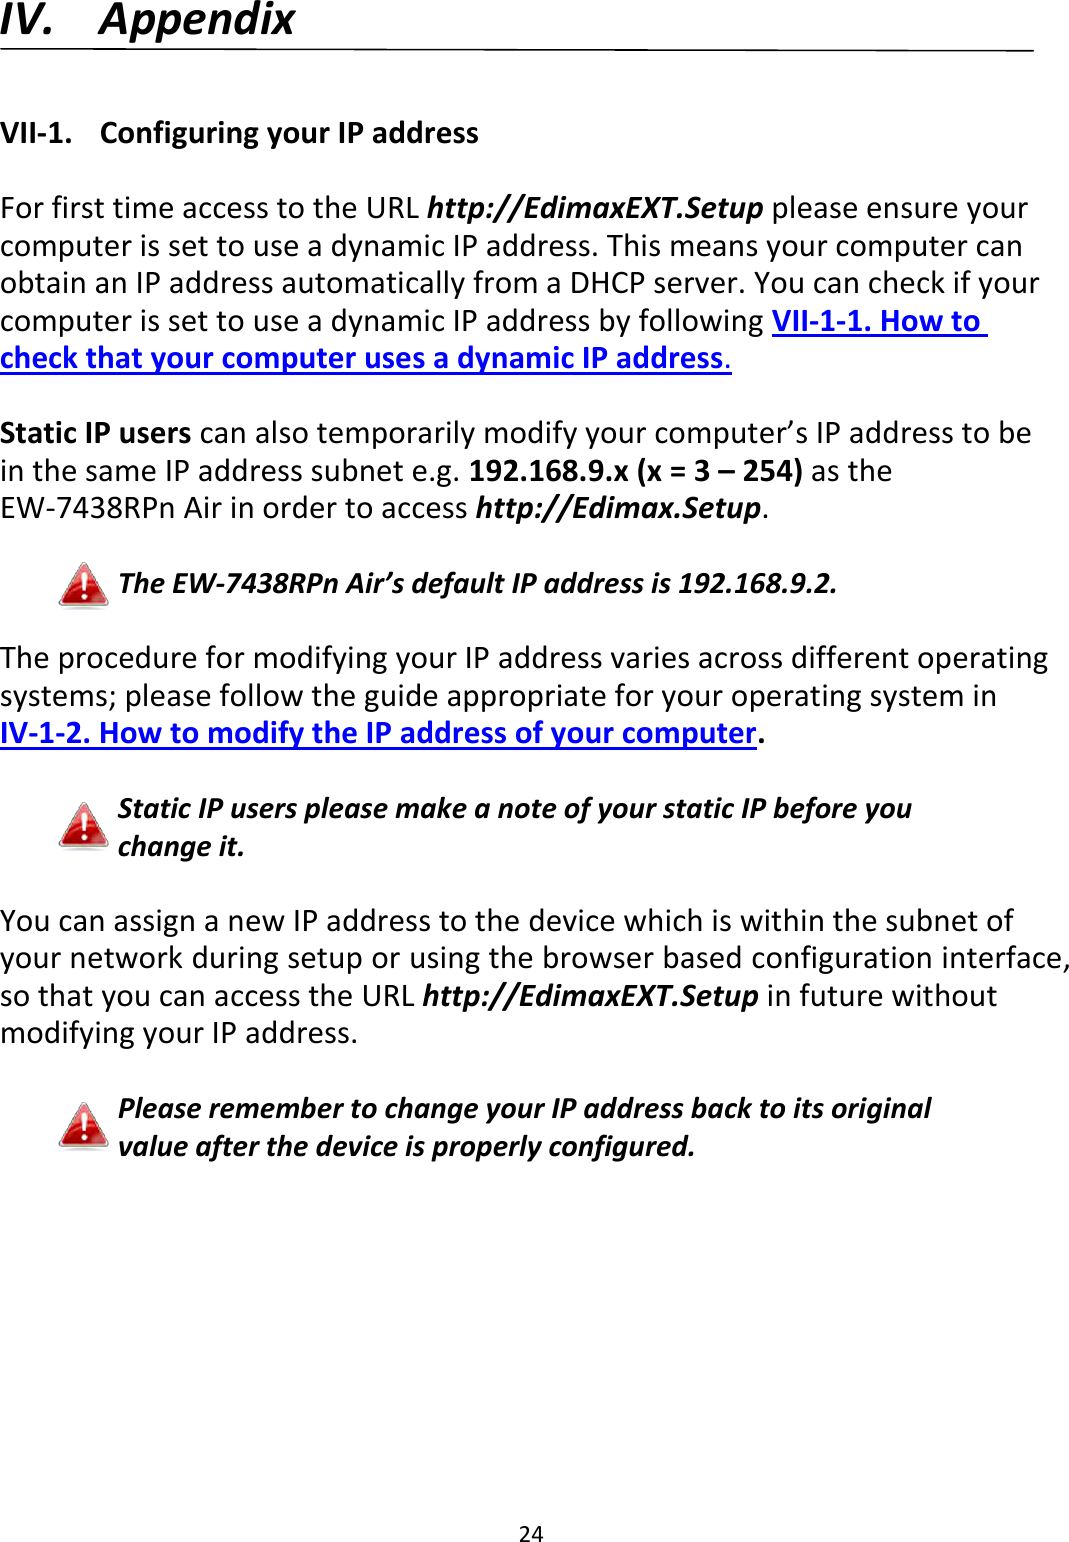 24    IV. Appendix  VII-1.  Configuring your IP address  For first time access to the URL http://EdimaxEXT.Setup please ensure your computer is set to use a dynamic IP address. This means your computer can obtain an IP address automatically from a DHCP server. You can check if your computer is set to use a dynamic IP address by following VII-1-1. How to check that your computer uses a dynamic IP address.  Static IP users can also temporarily modify your computer’s IP address to be in the same IP address subnet e.g. 192.168.9.x (x = 3 – 254) as the EW-7438RPn Air in order to access http://Edimax.Setup.  The EW-7438RPn Air’s default IP address is 192.168.9.2.  The procedure for modifying your IP address varies across different operating systems; please follow the guide appropriate for your operating system in IV-1-2. How to modify the IP address of your computer.  Static IP users please make a note of your static IP before you change it.  You can assign a new IP address to the device which is within the subnet of your network during setup or using the browser based configuration interface, so that you can access the URL http://EdimaxEXT.Setup in future without modifying your IP address.  Please remember to change your IP address back to its original value after the device is properly configured.  